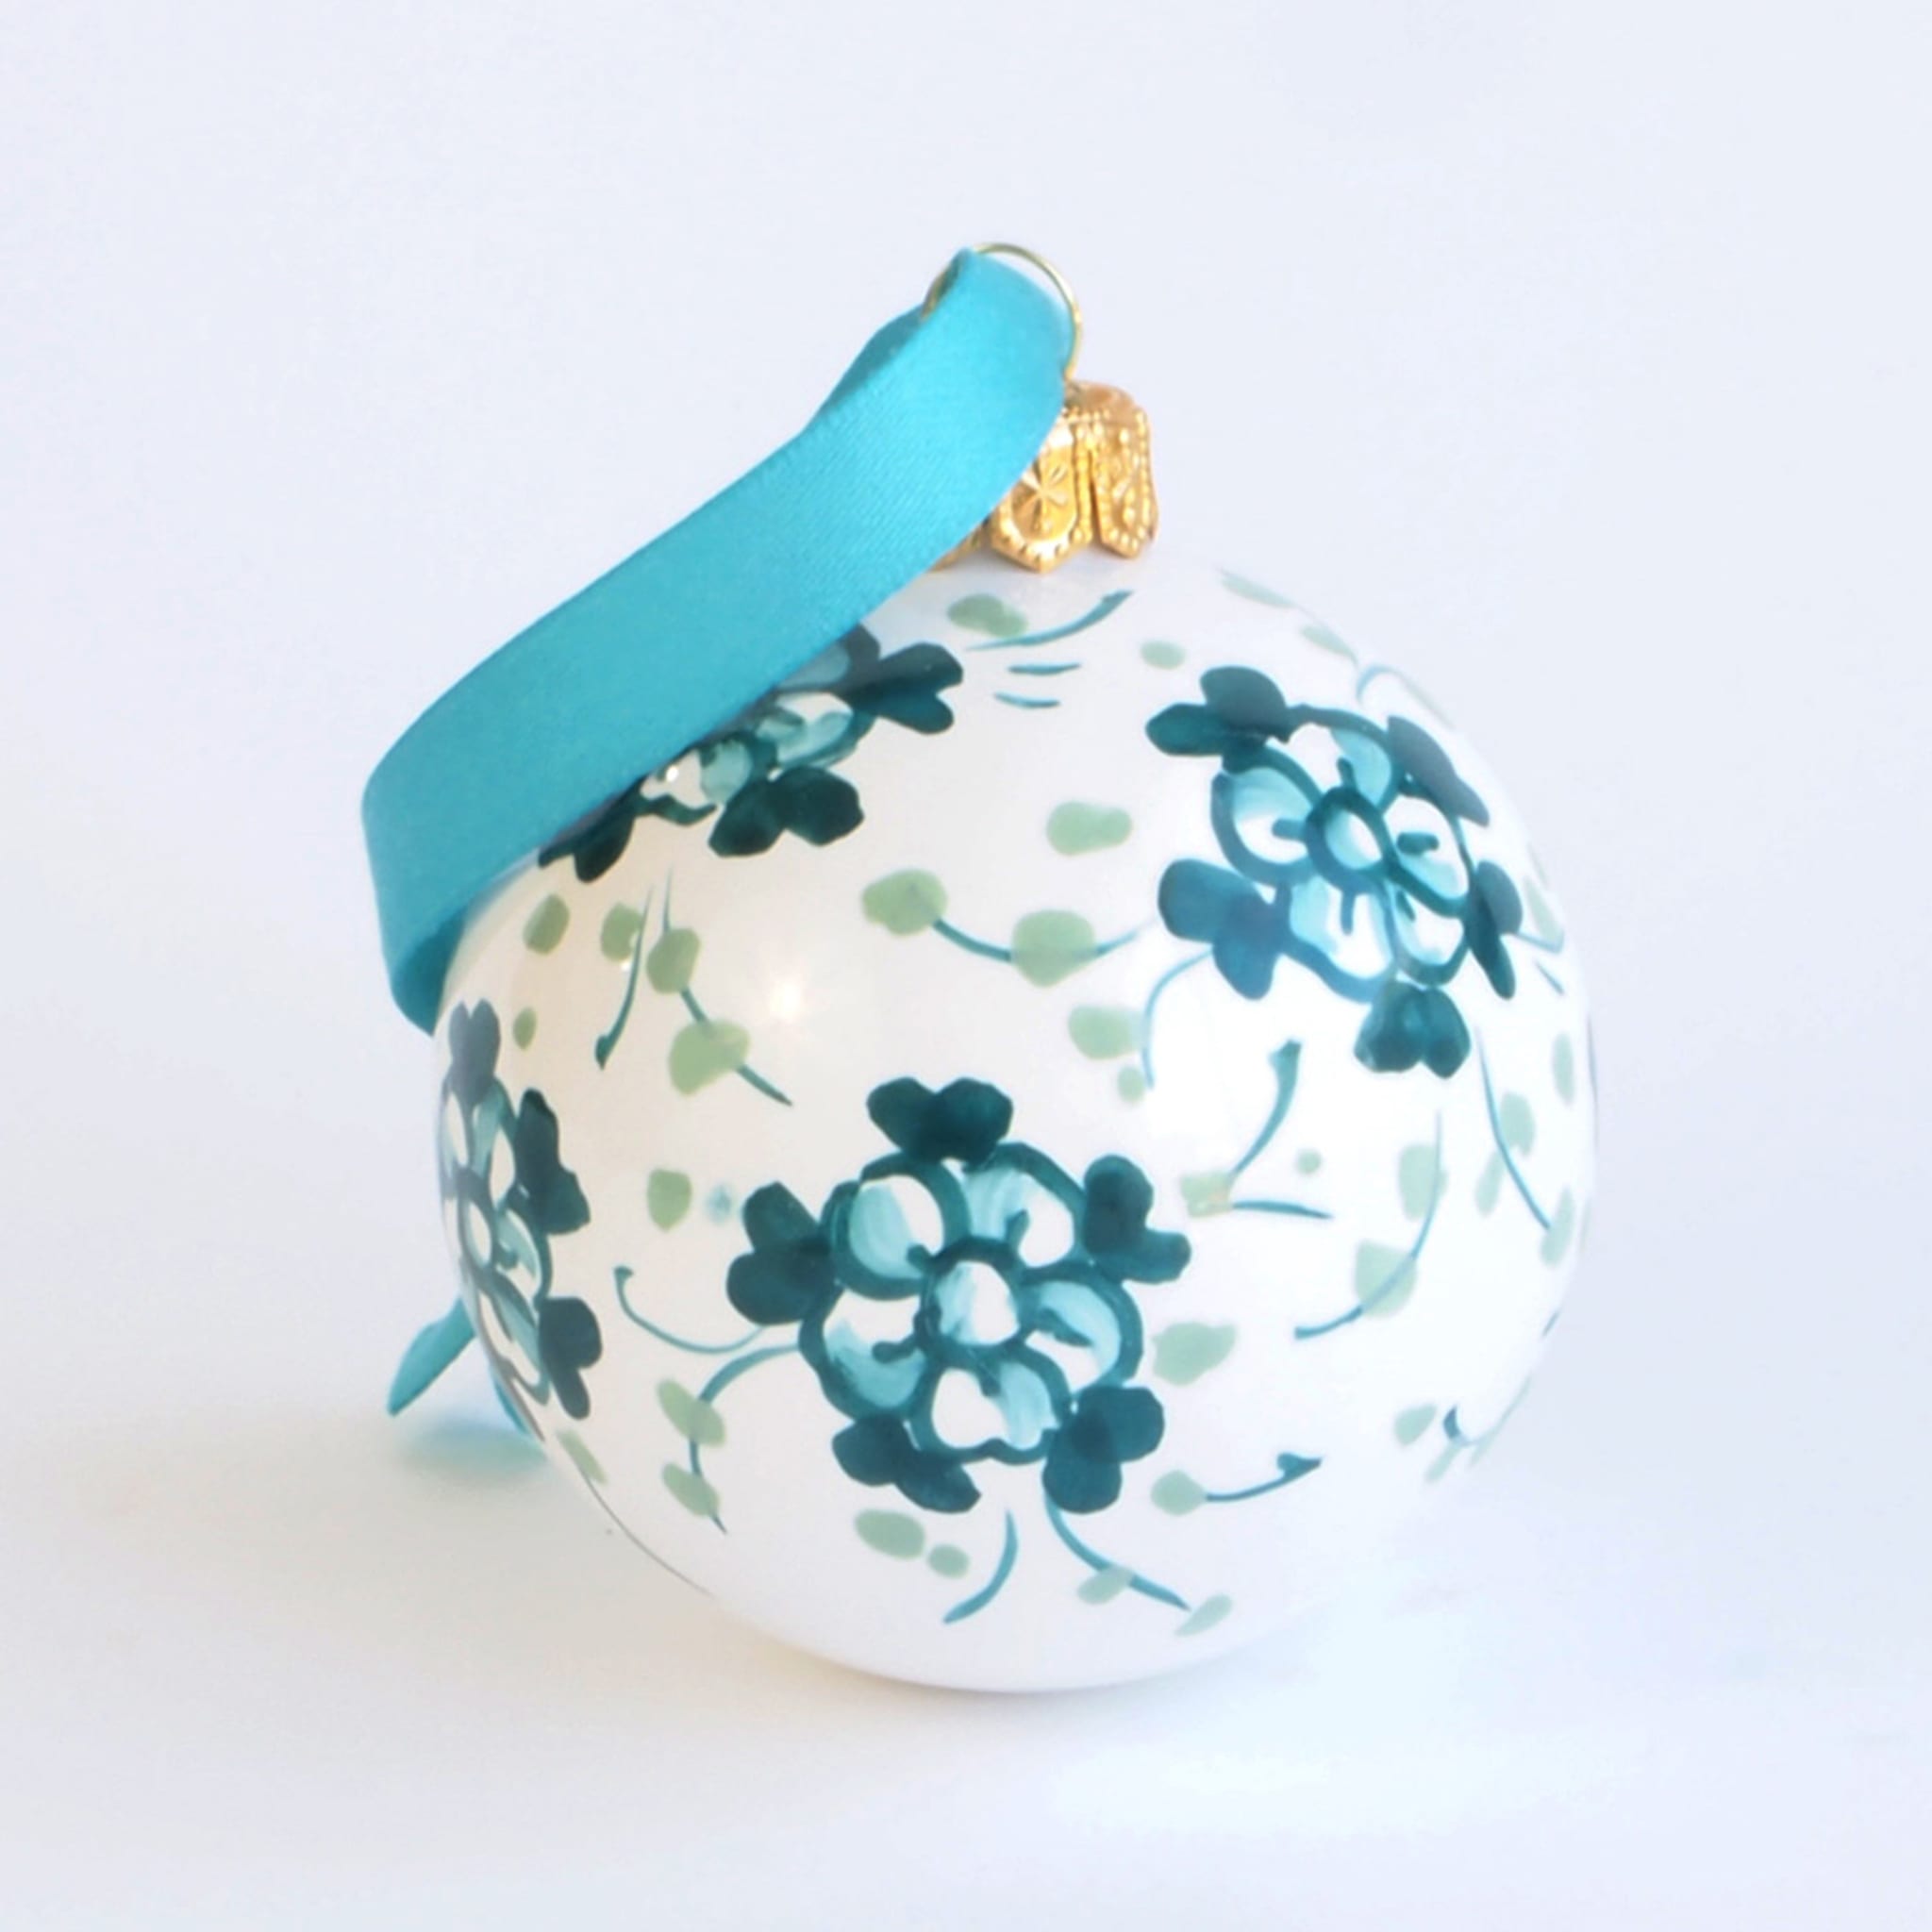 Turquoise Floral Christmas Ball Ornament #1 - Alternative view 1